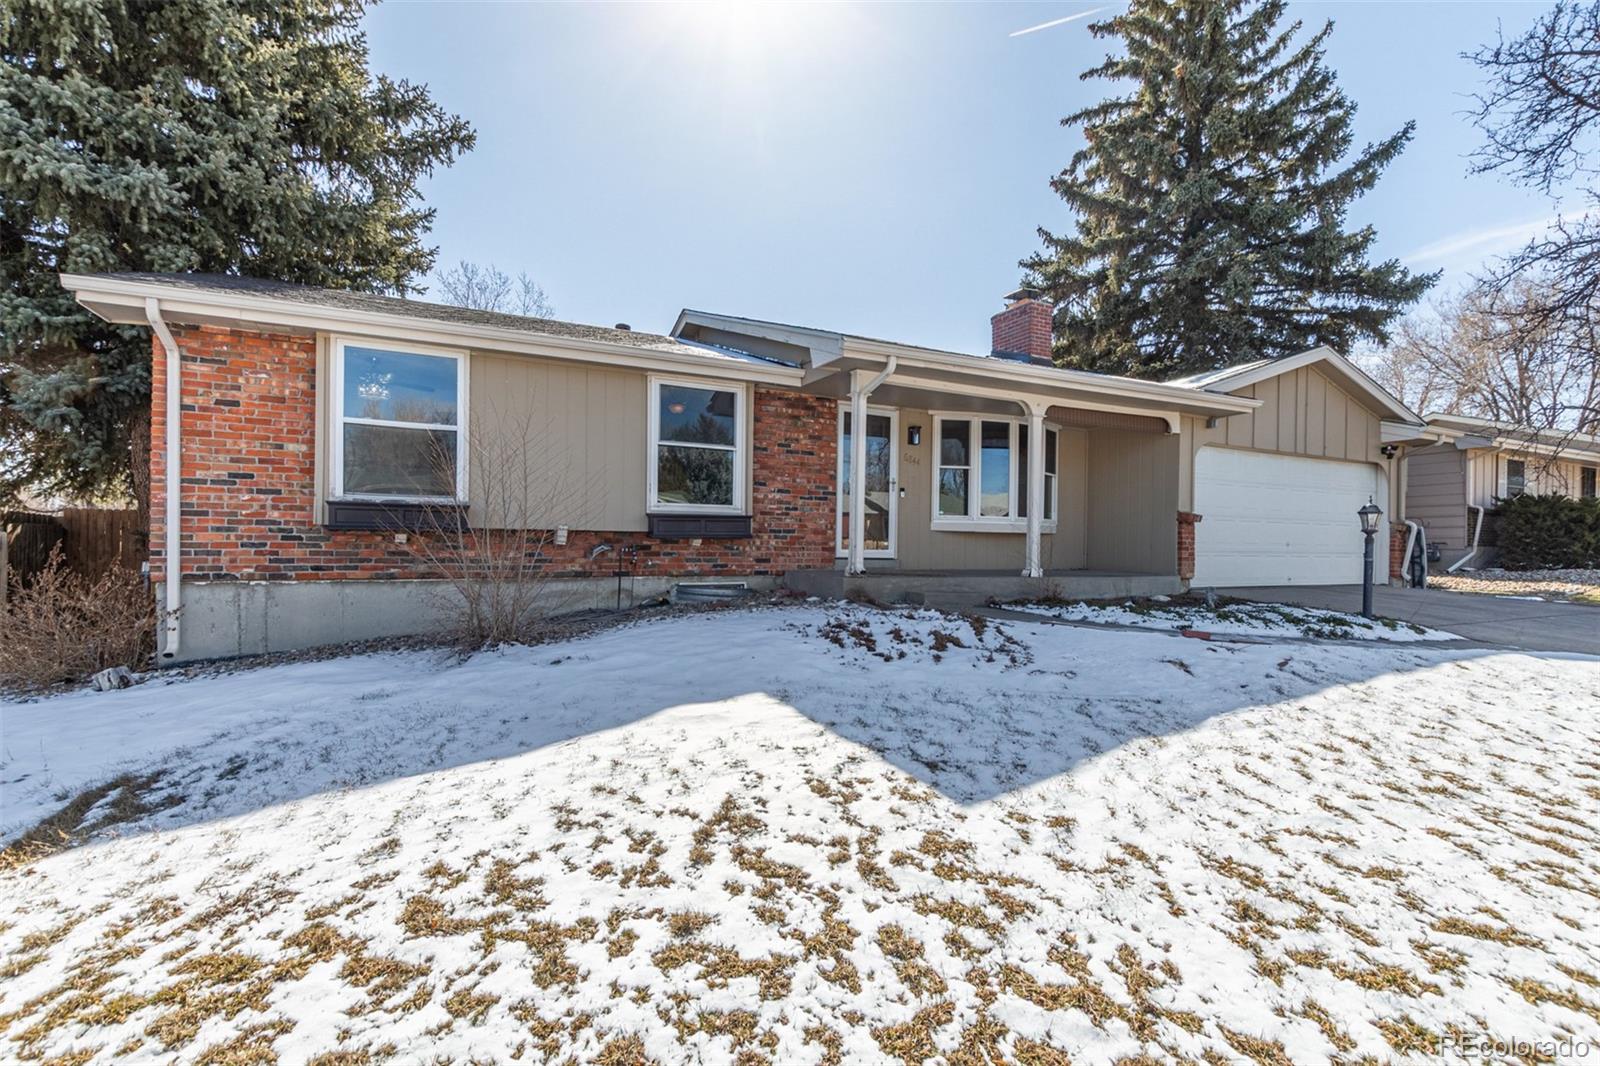 Report Image for 6844 W 76th Place,Arvada, Colorado